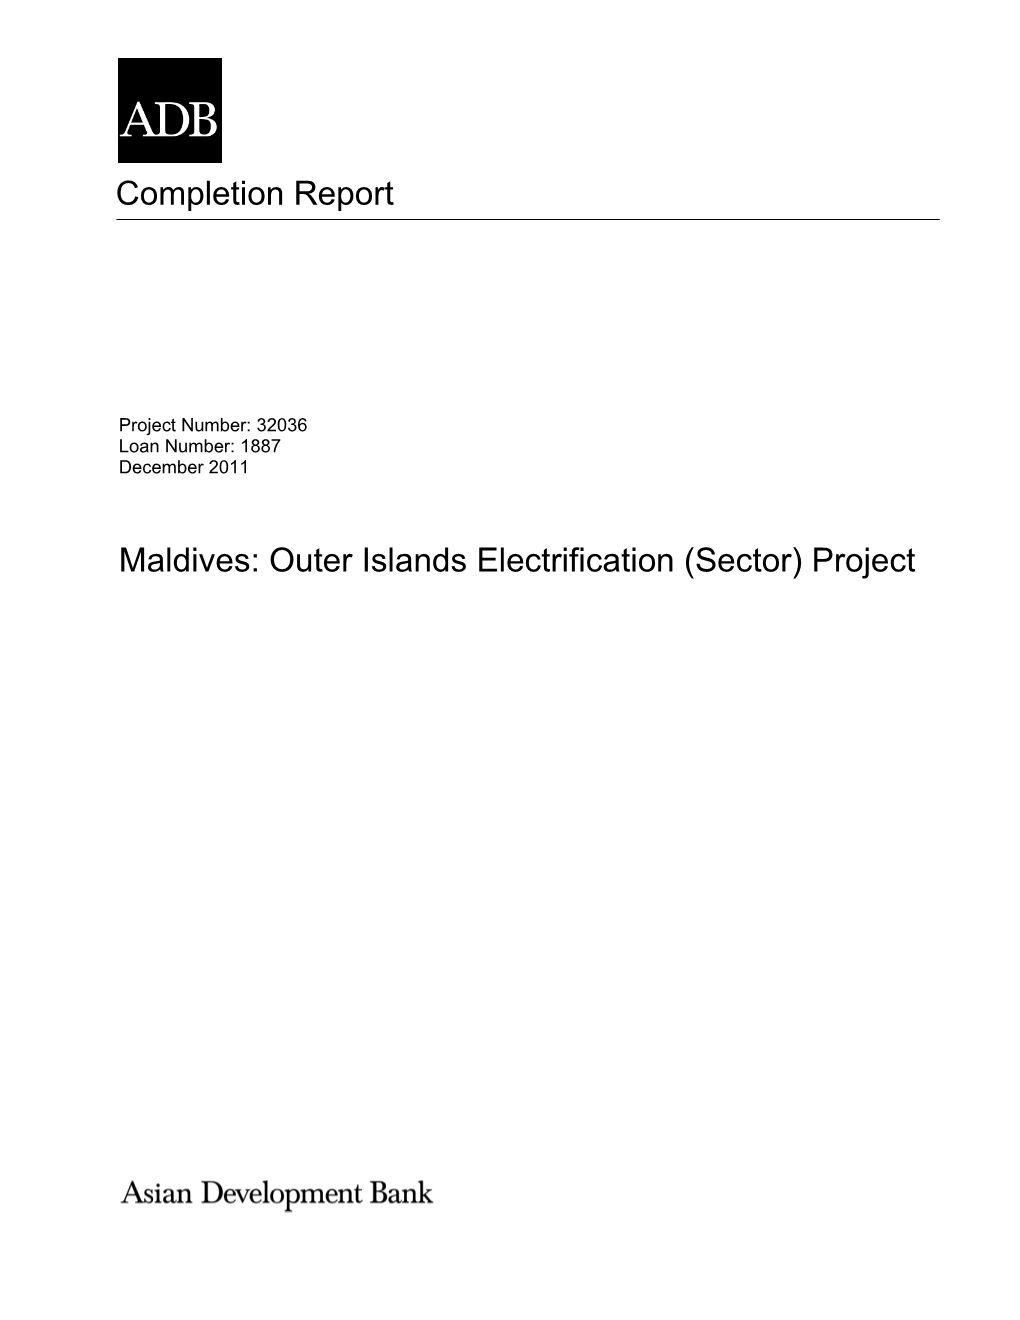 Maldives: Outer Islands Electrification (Sector) Project